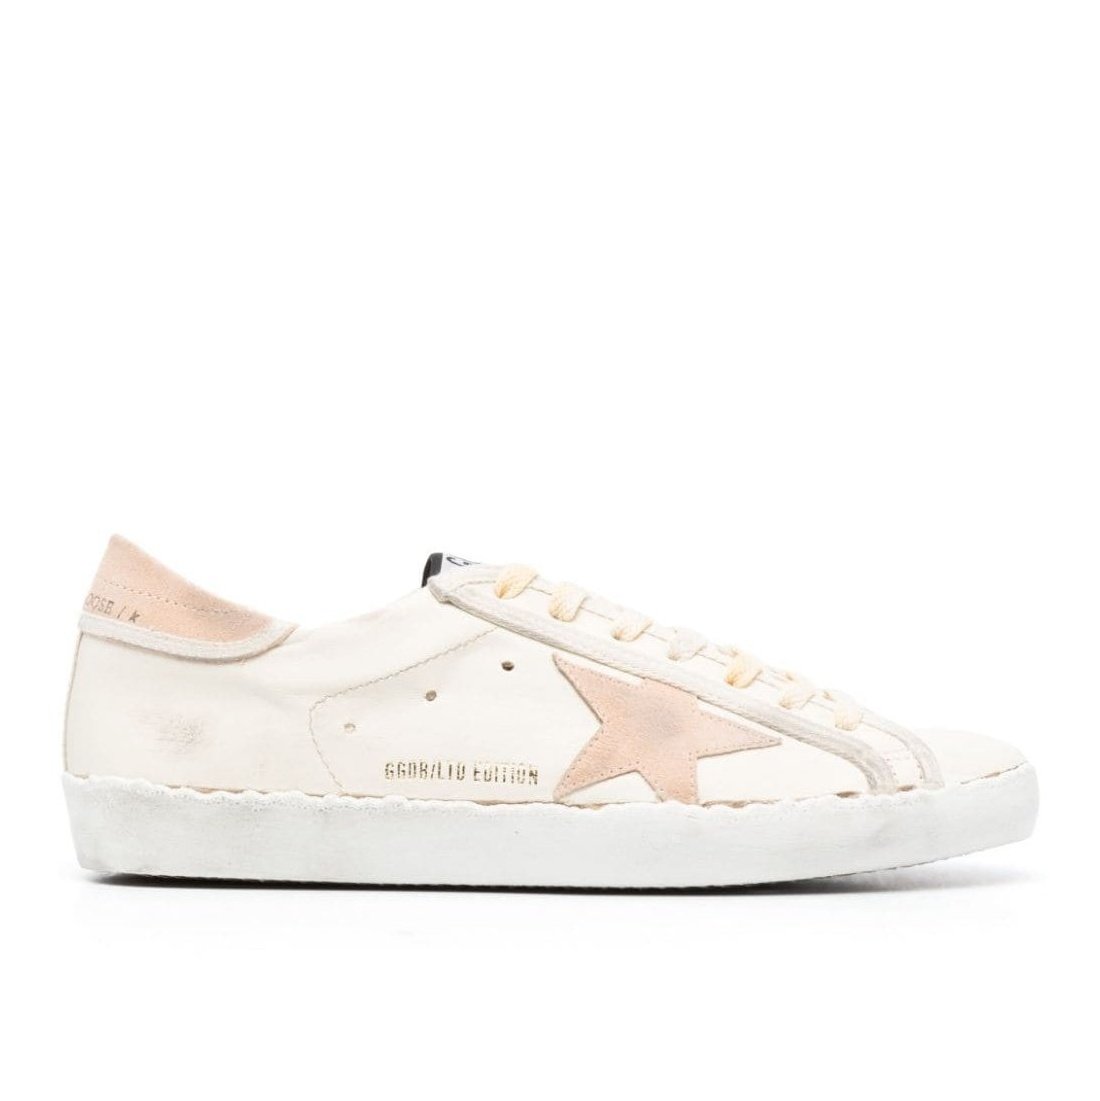 Super-Star leather sneakers